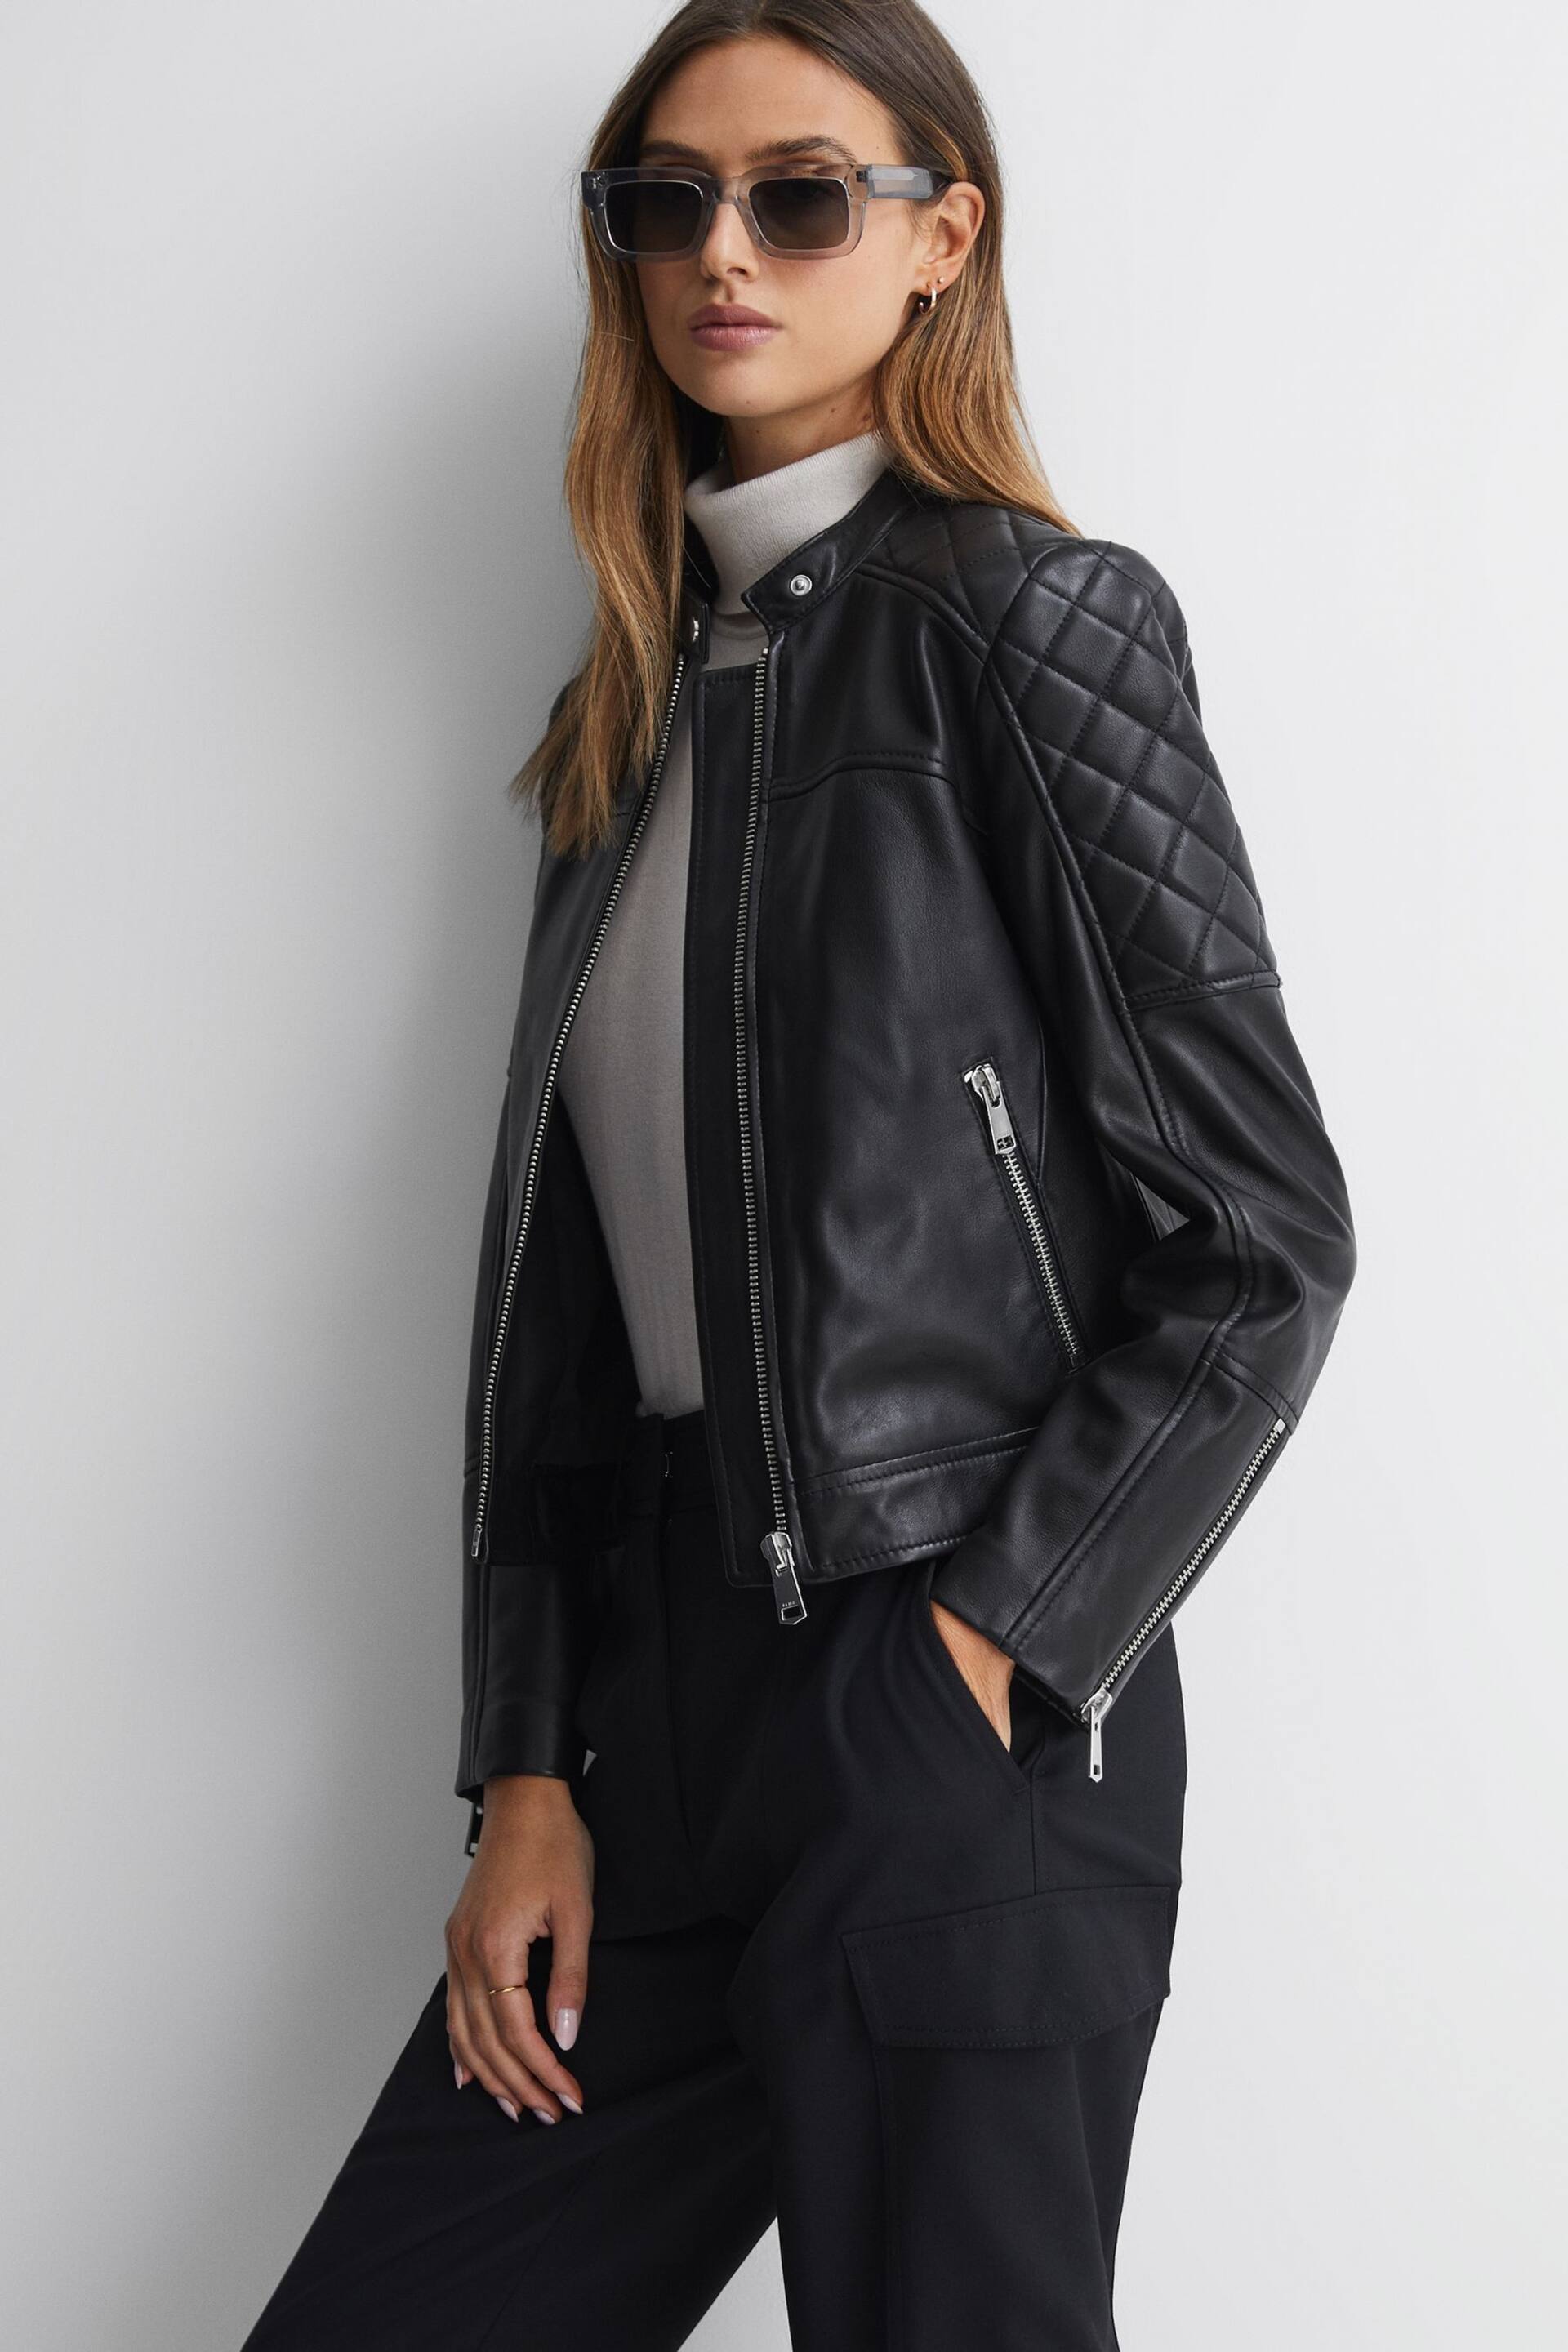 Reiss Black Adelaide Leather Collarless Quilted Jacket - Image 3 of 5